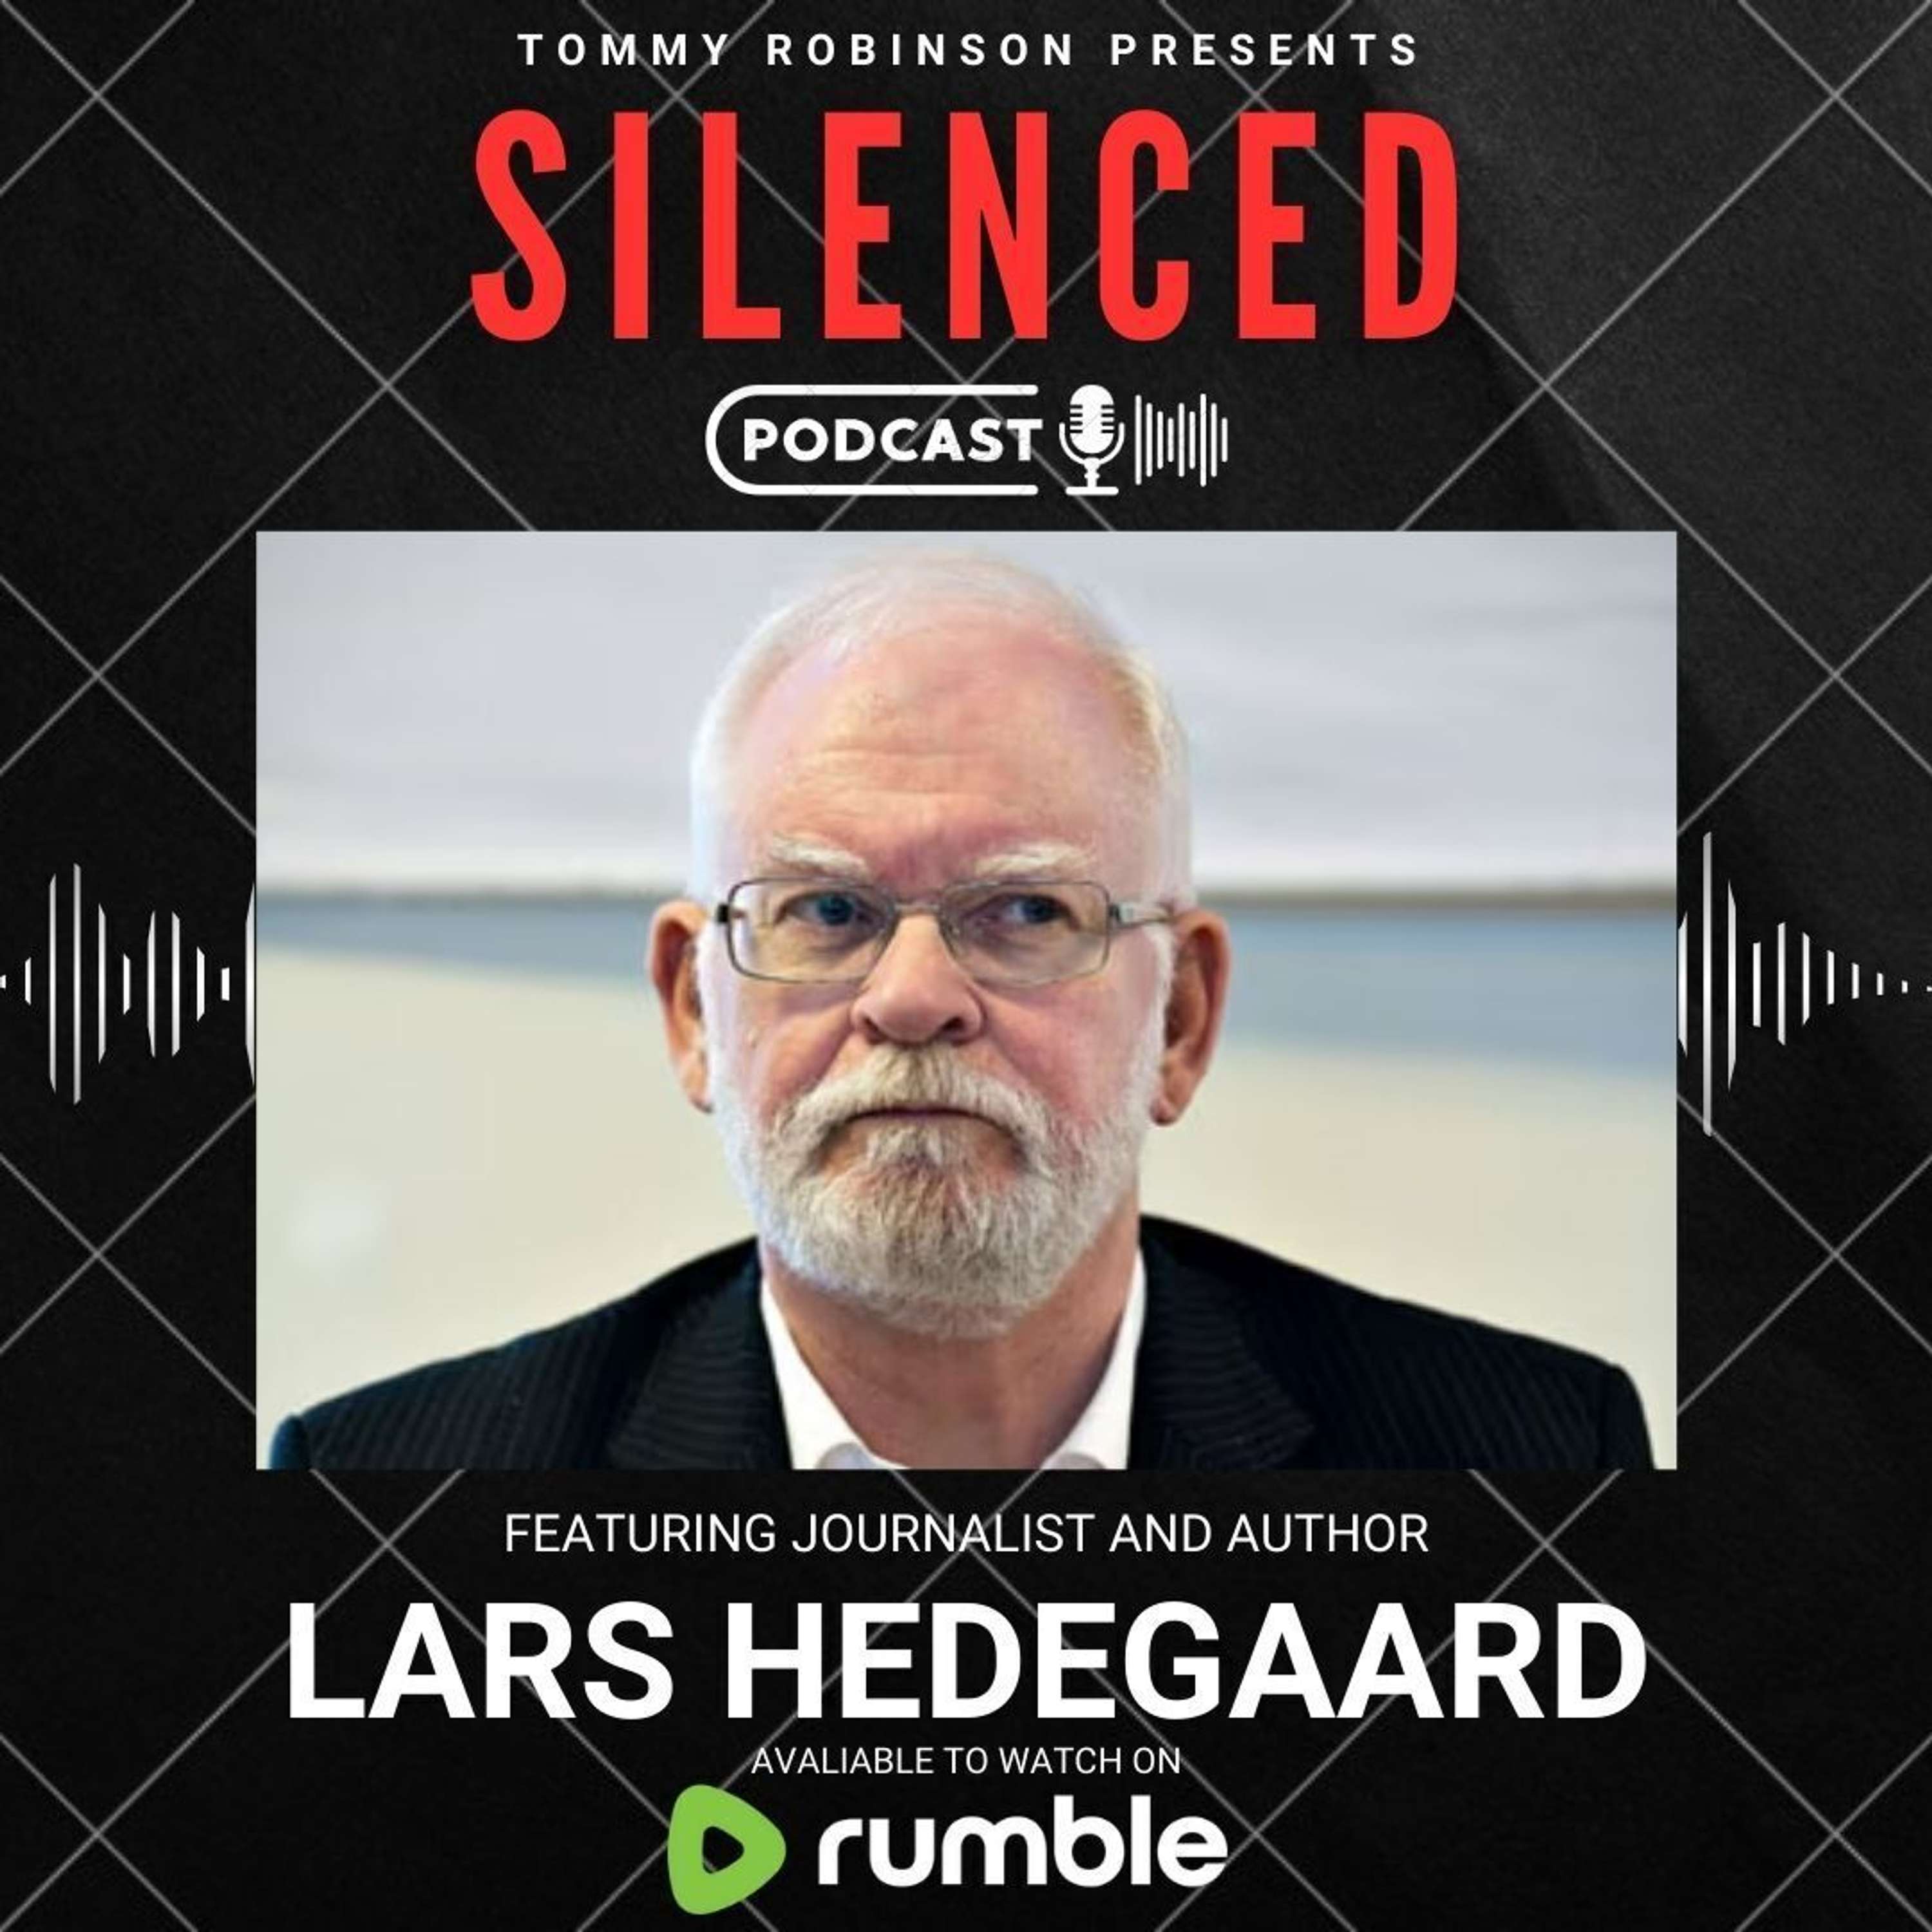 Episode 12 SILENCED with Tommy Robinson - Lars Hedegaard